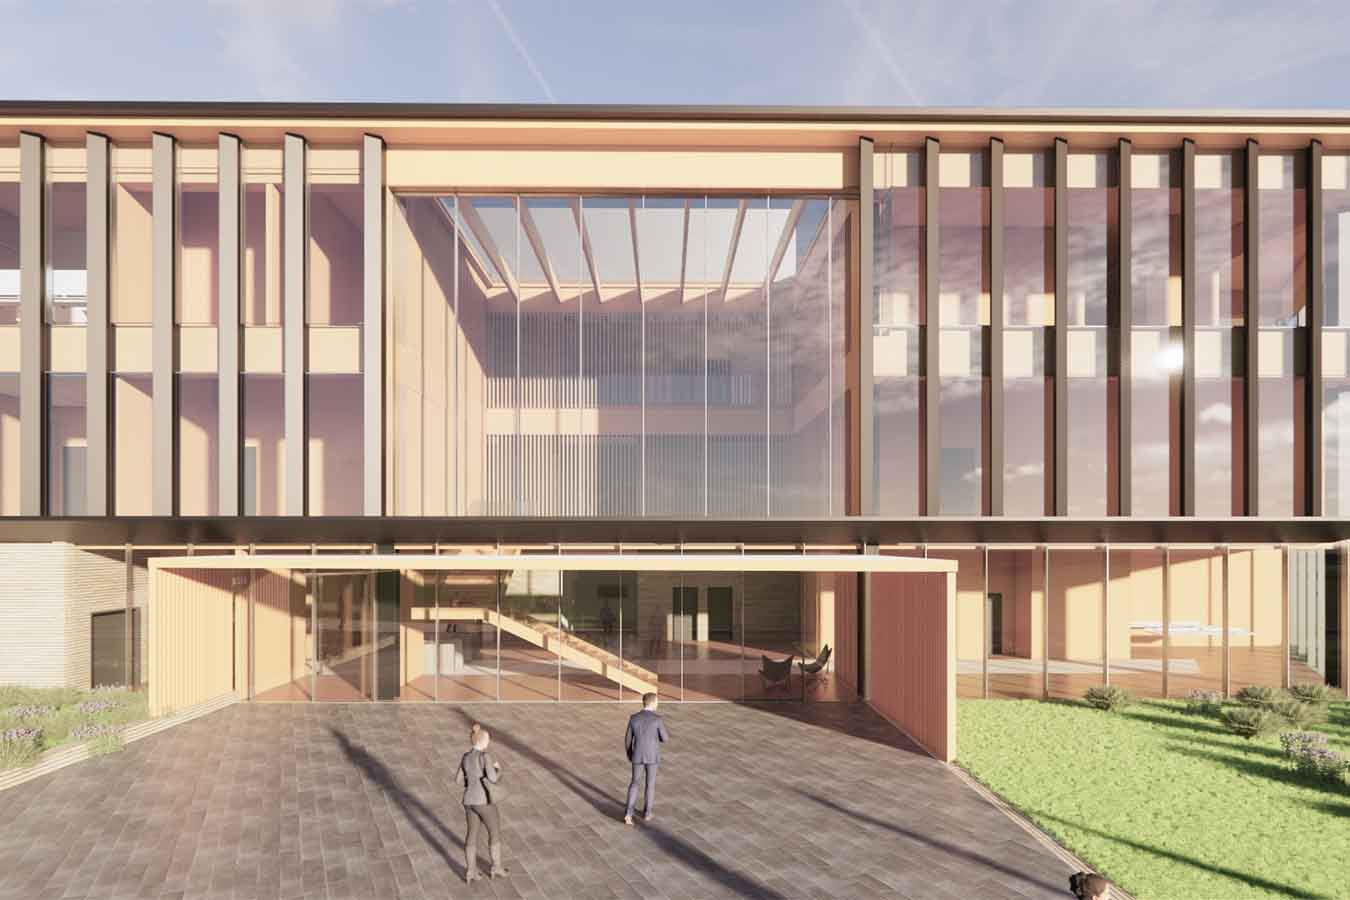 Rendering of the ARL Sioux Falls building